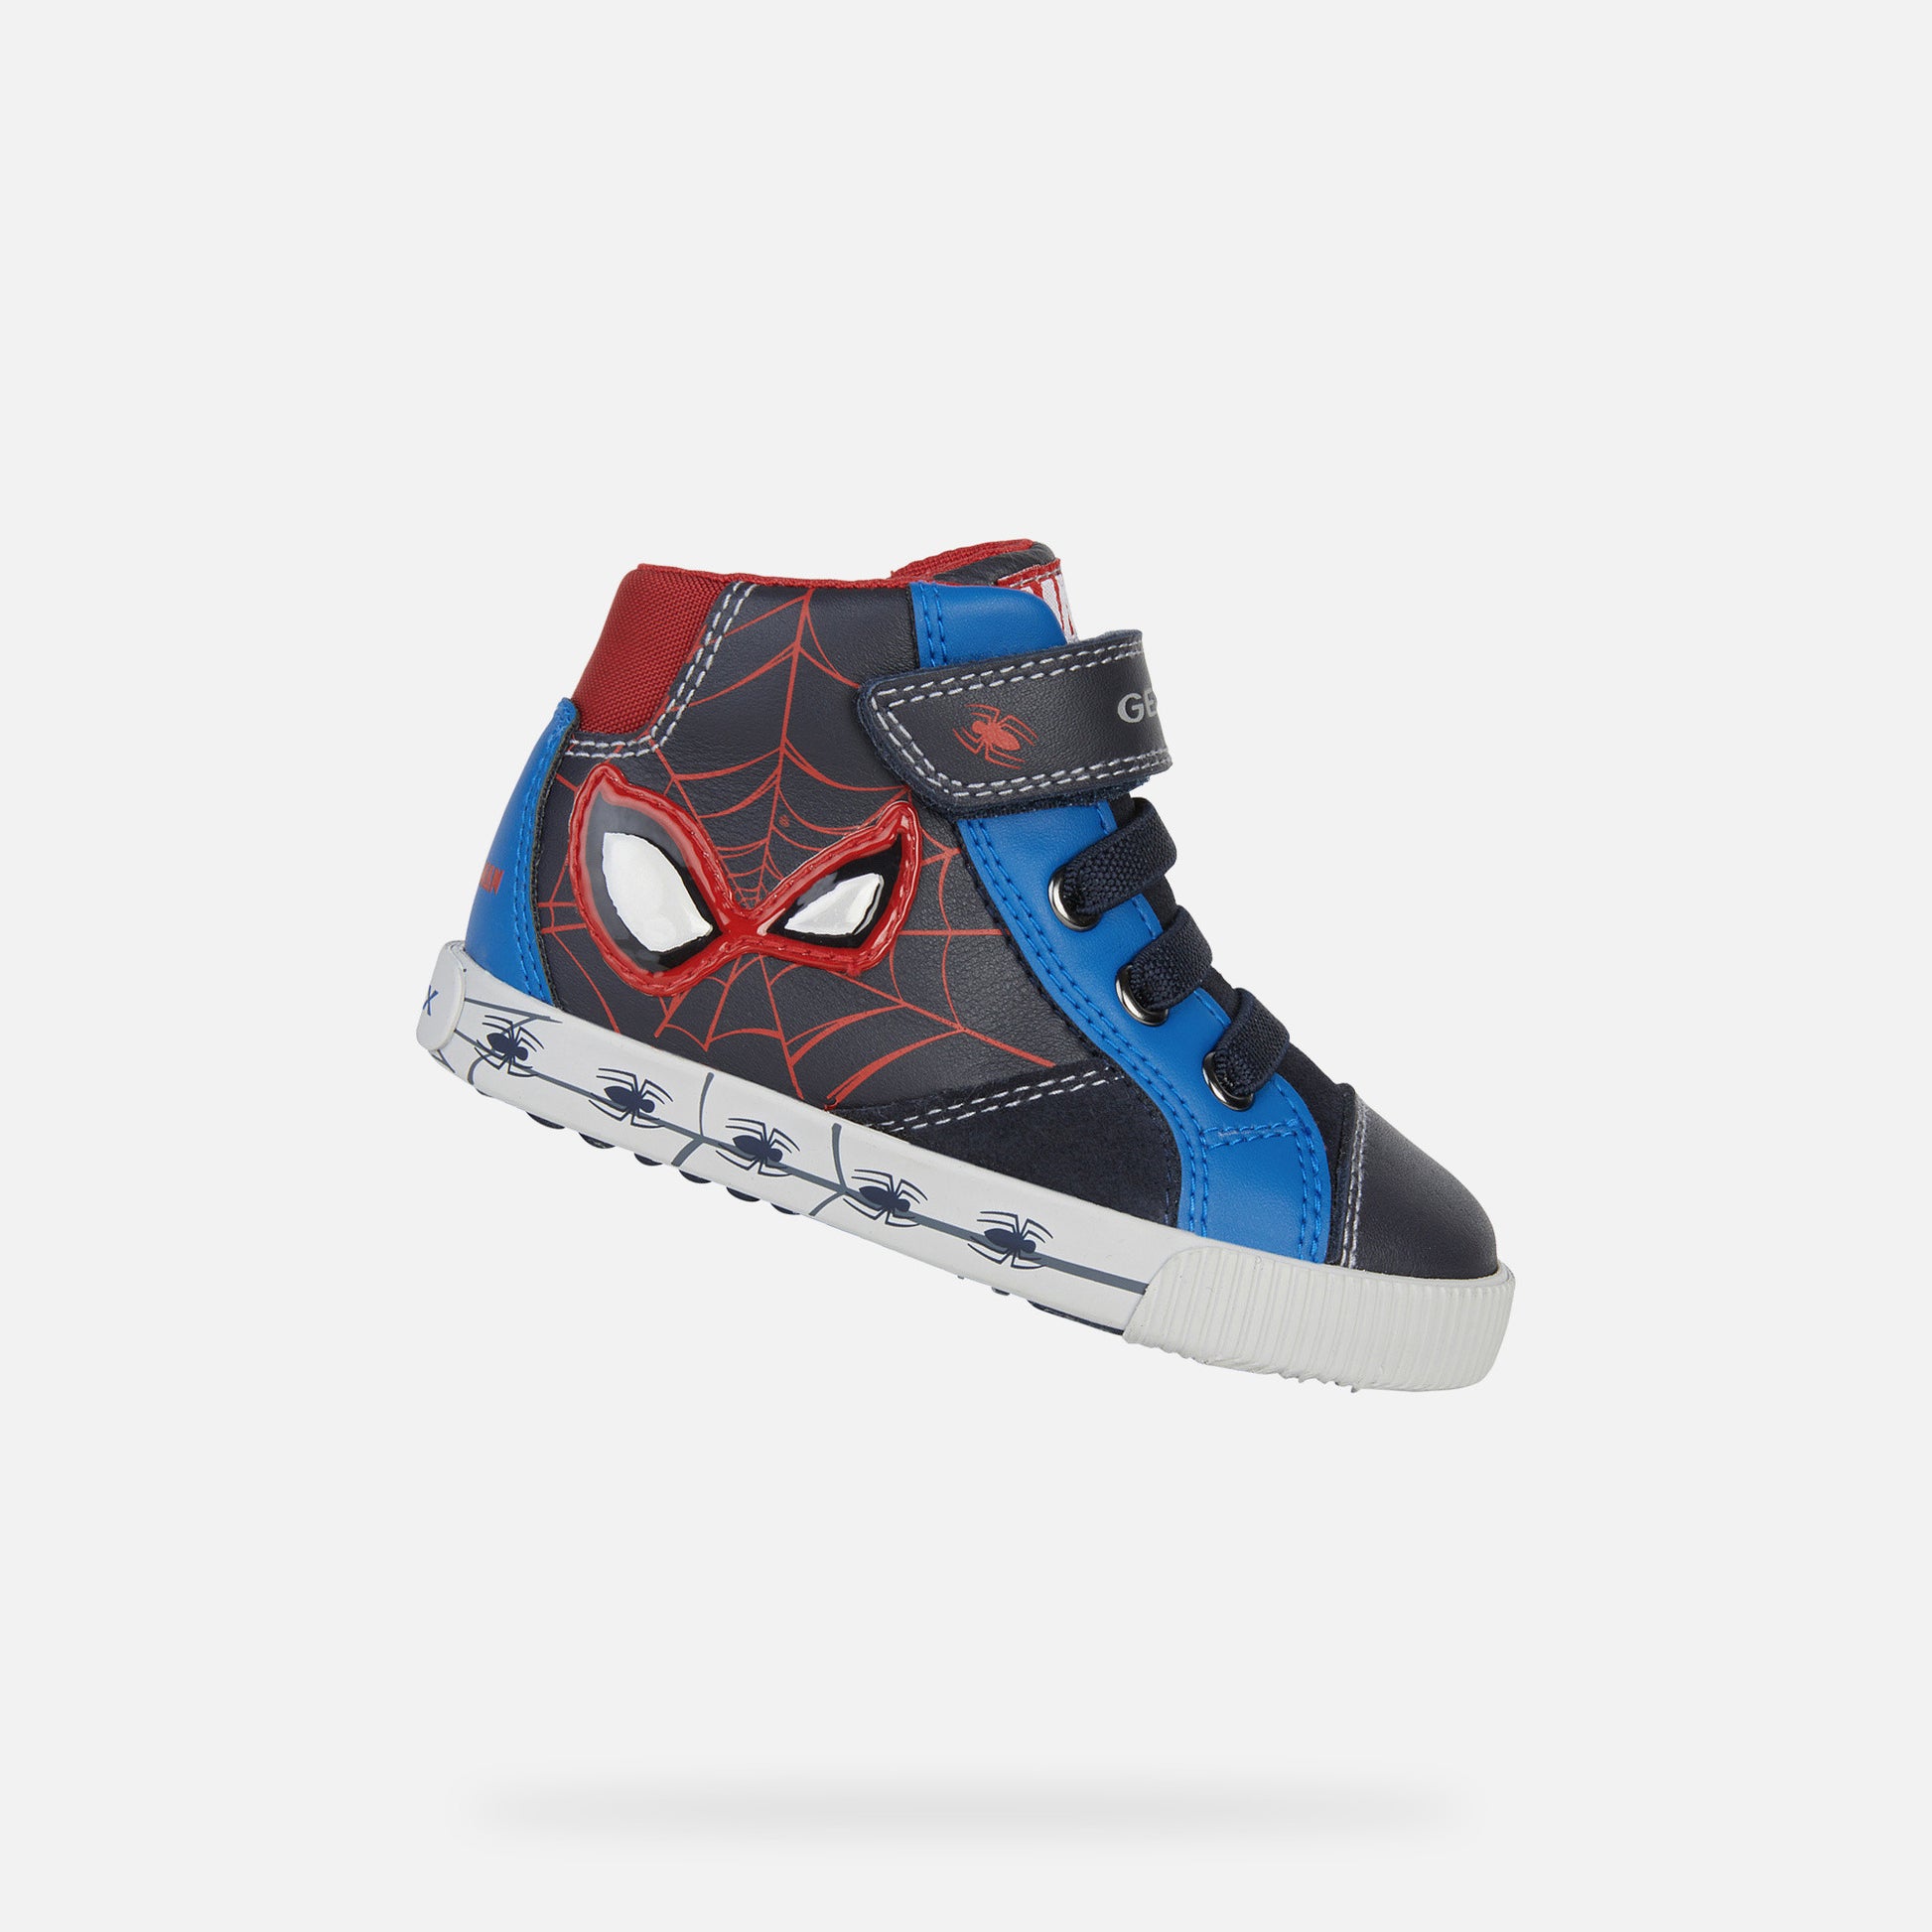 A boys Hi-Top trainer by Geox, style B Kilwi Boy Spiderman, in navy and royal with red Spiderman detail, velcro and inside zip fastening. Right side view.